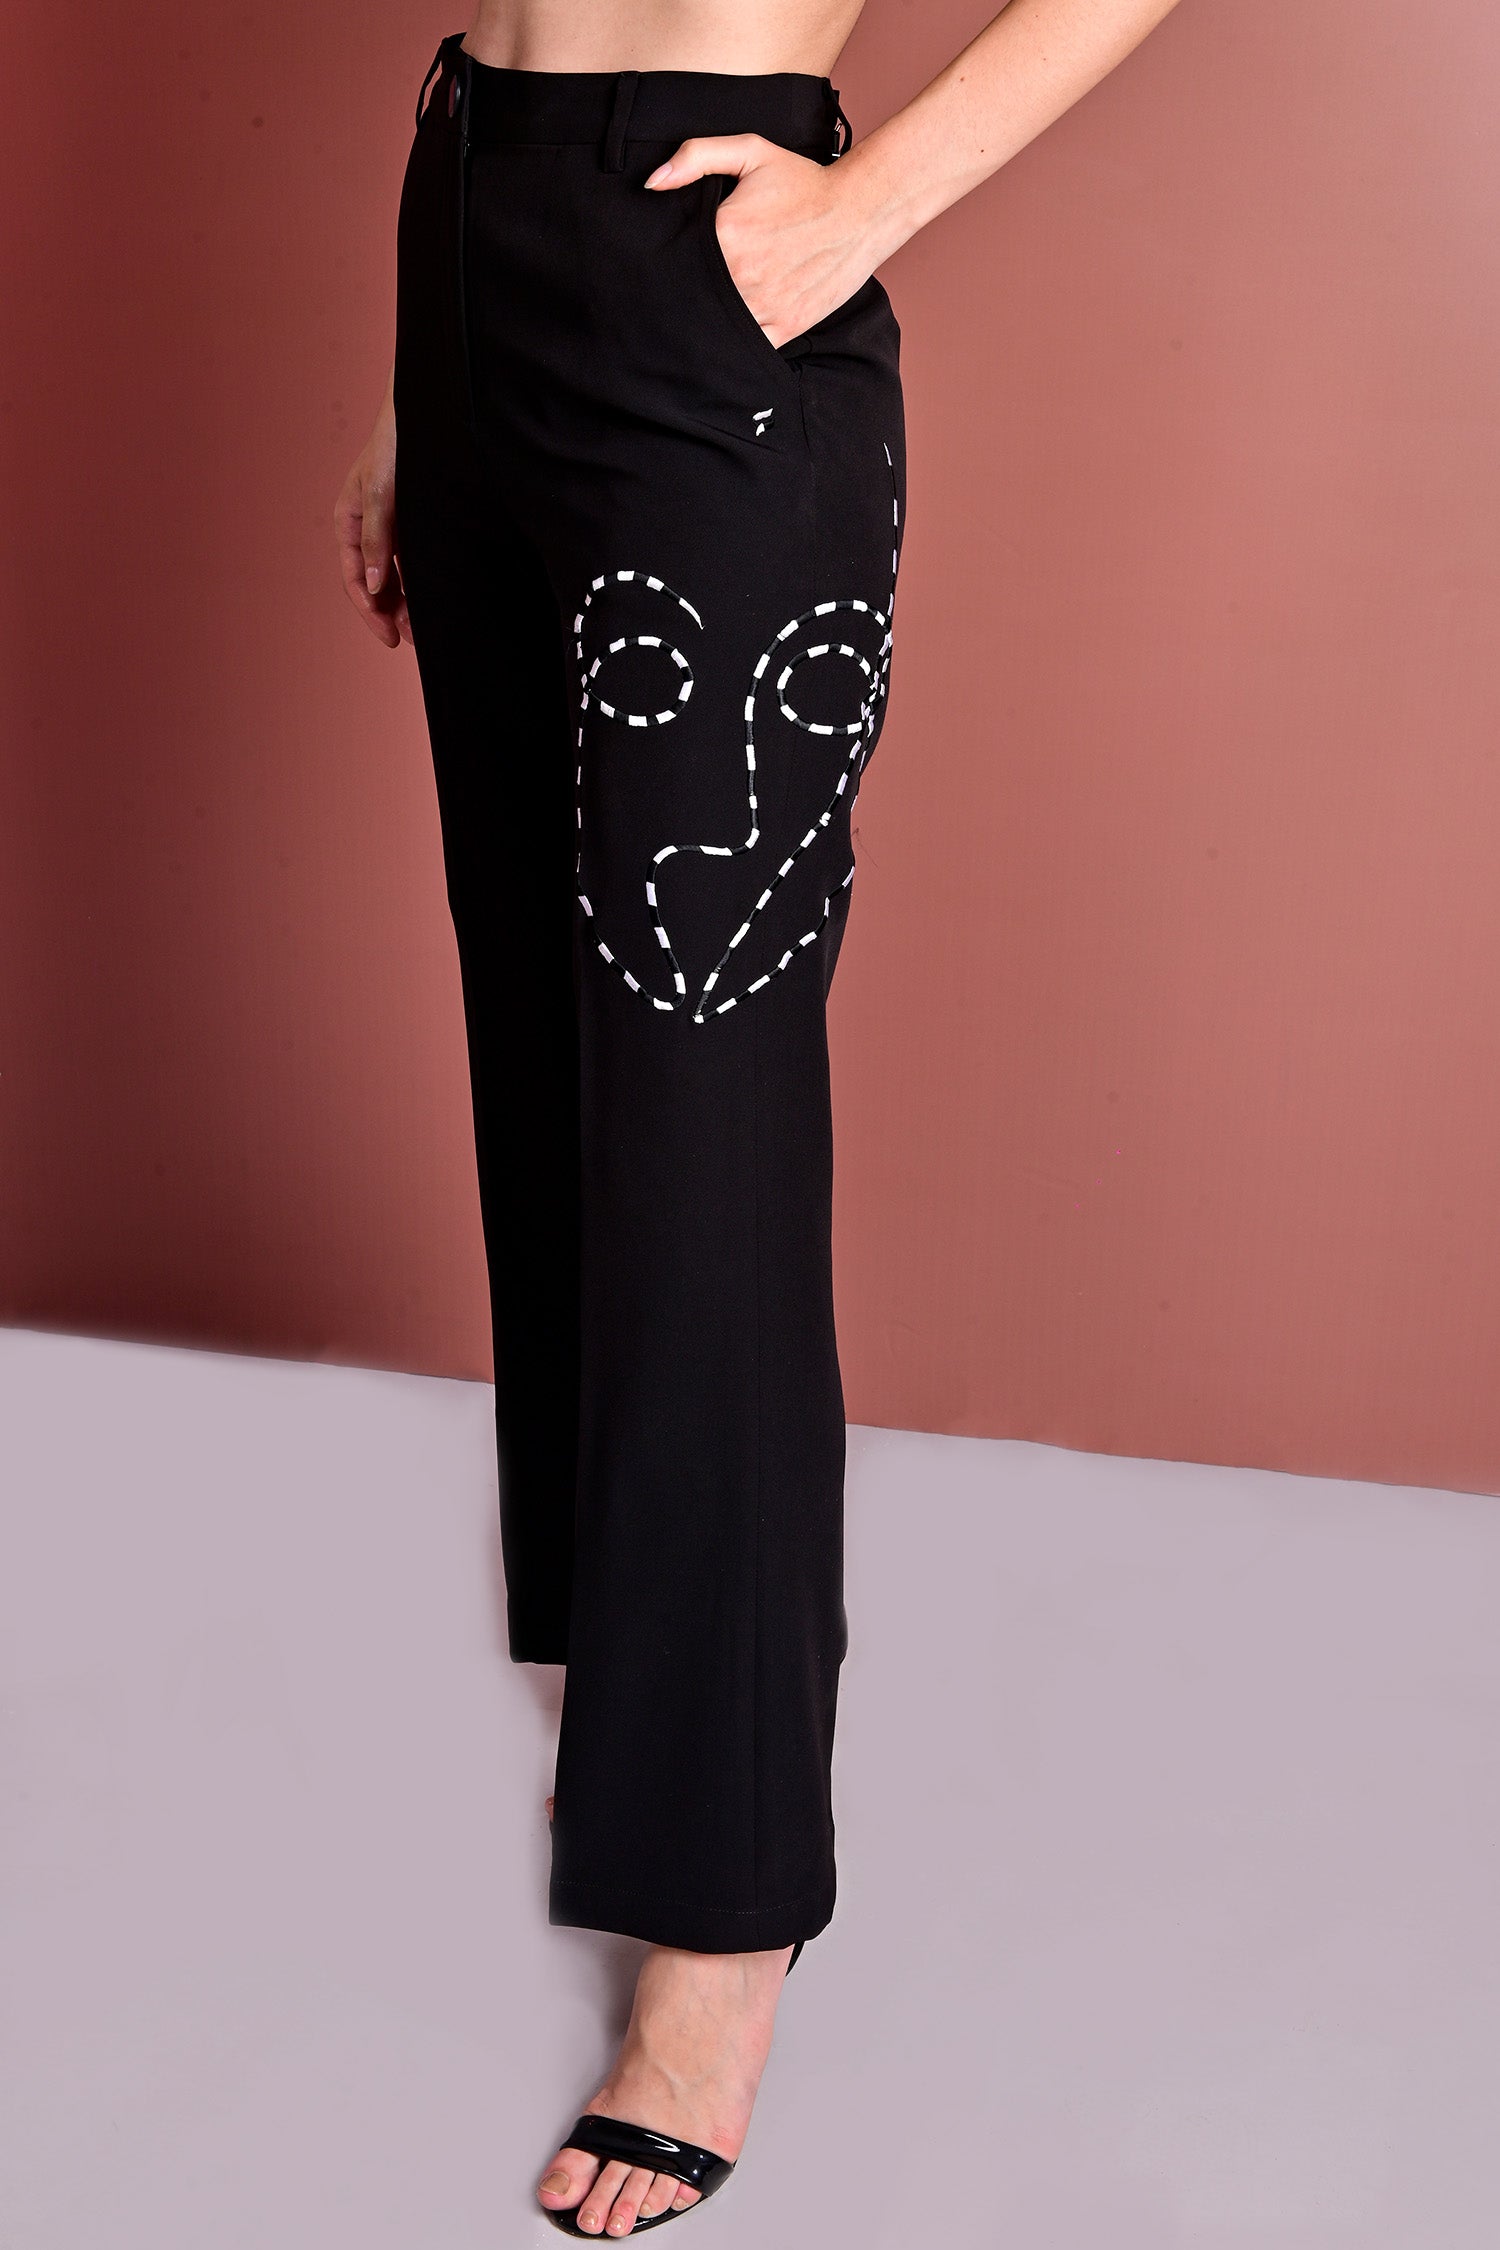 Black Embroidered Blazer With Crop Top And Flared Pants – Semya by